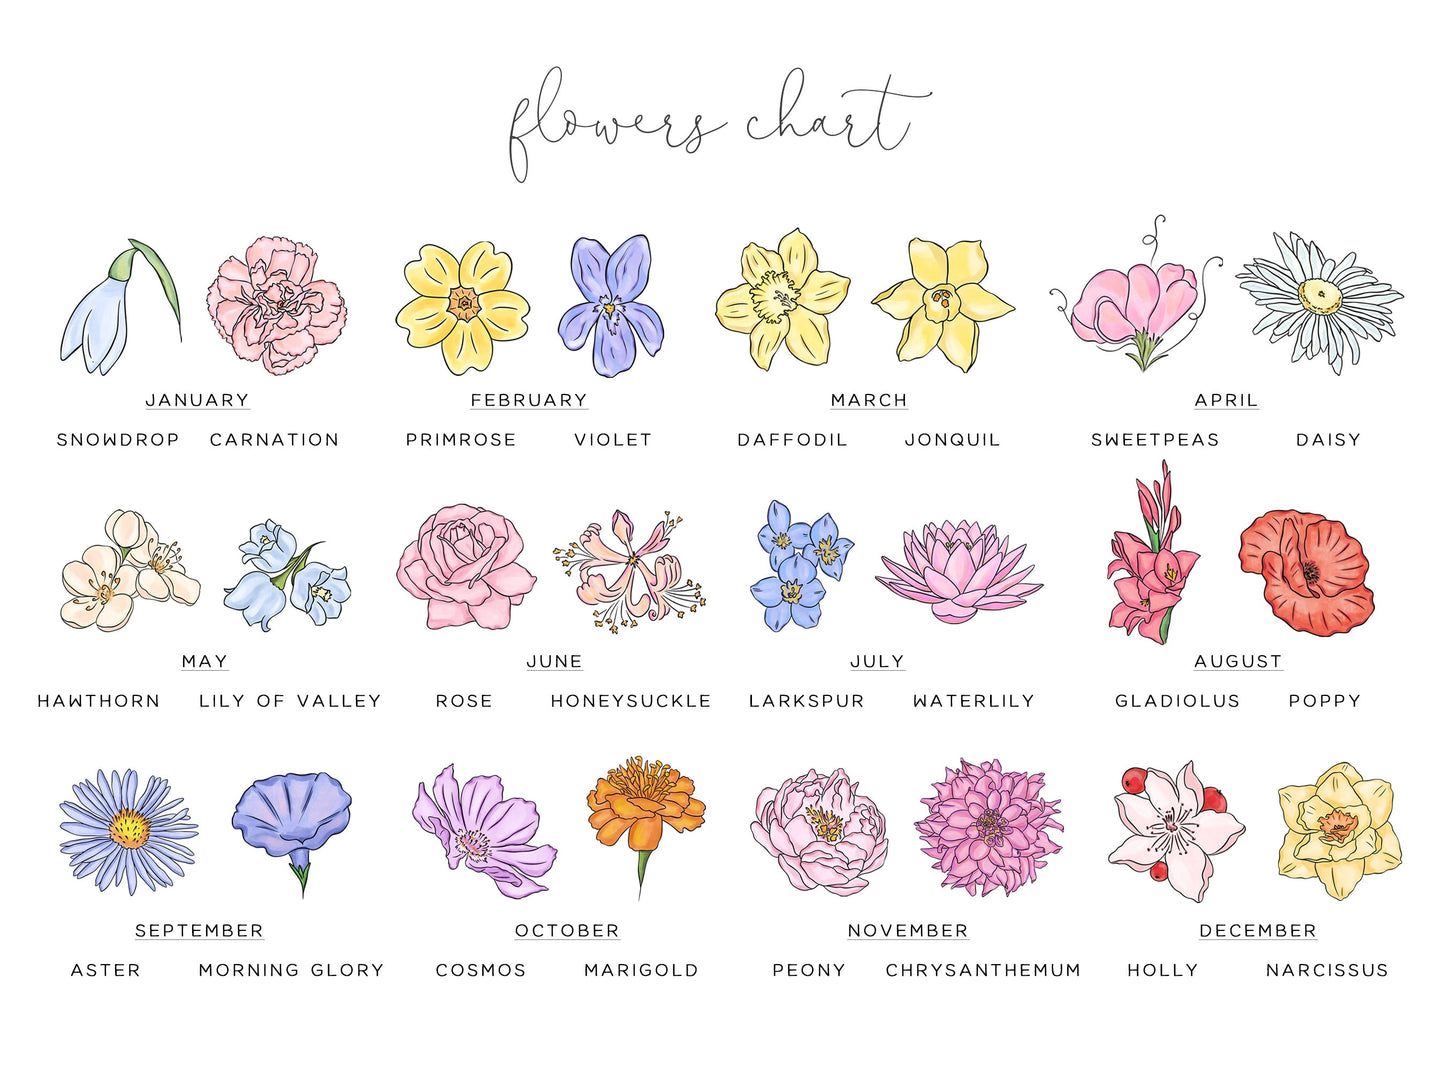 May Birth Flower Print Personalized, Birthday Gift for Female